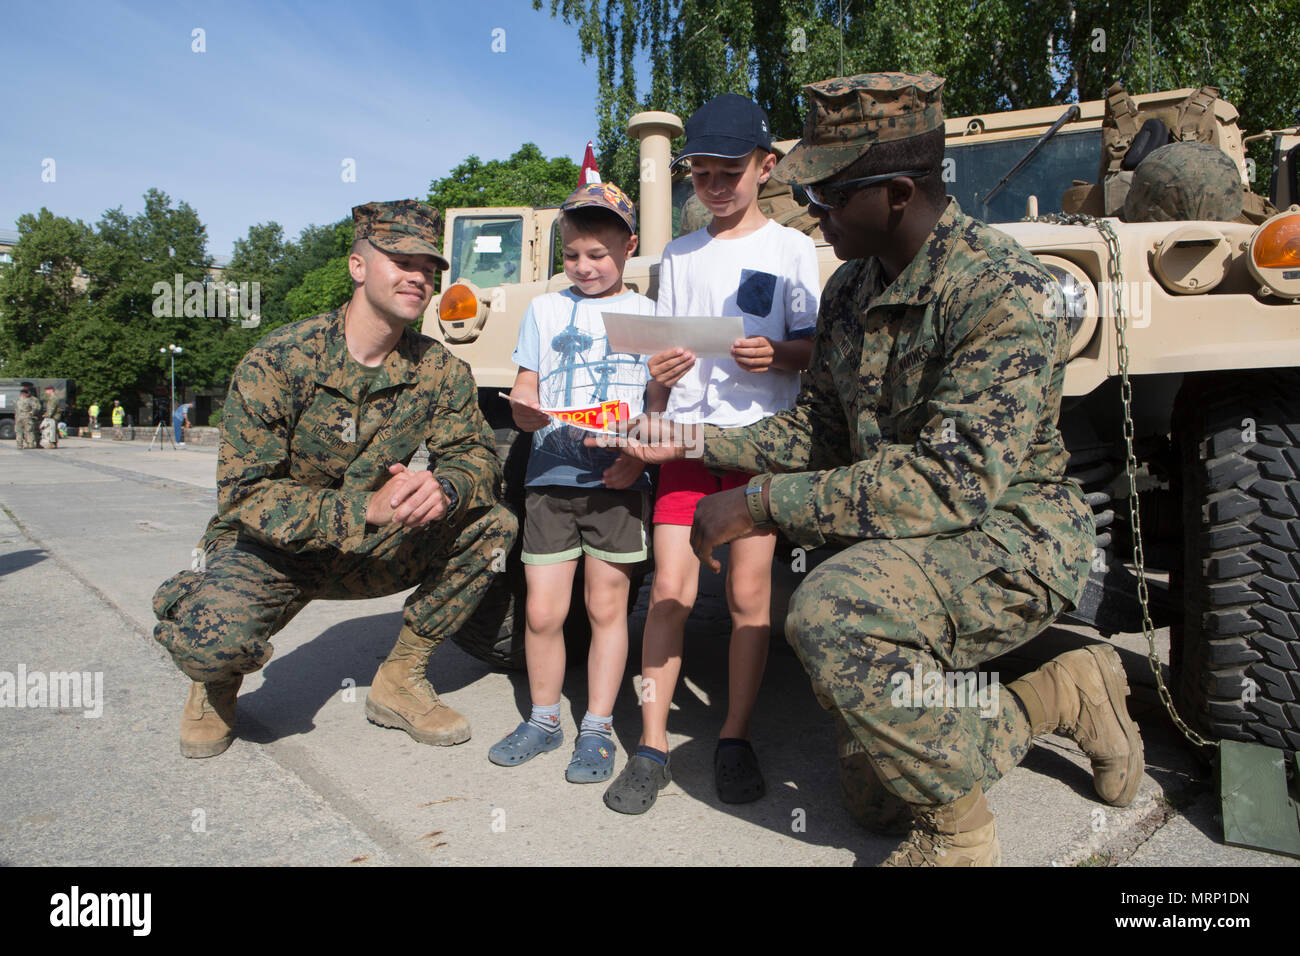 U.S. Marines with Marine Corps Forces Europe and Africa share Marine Corps stickers with Latvian children during a static display in Jelgava, Latvia, June 18, 2017. The event gave Marines the opportunity to meet with locals in the host country of Exercise Saber Strike 17, helping build stronger relationships with NATO Allies and partner nations beyond integrated training. (U.S. Marine Corps photo by Pfc. Sarah N. Petrock) Stock Photo